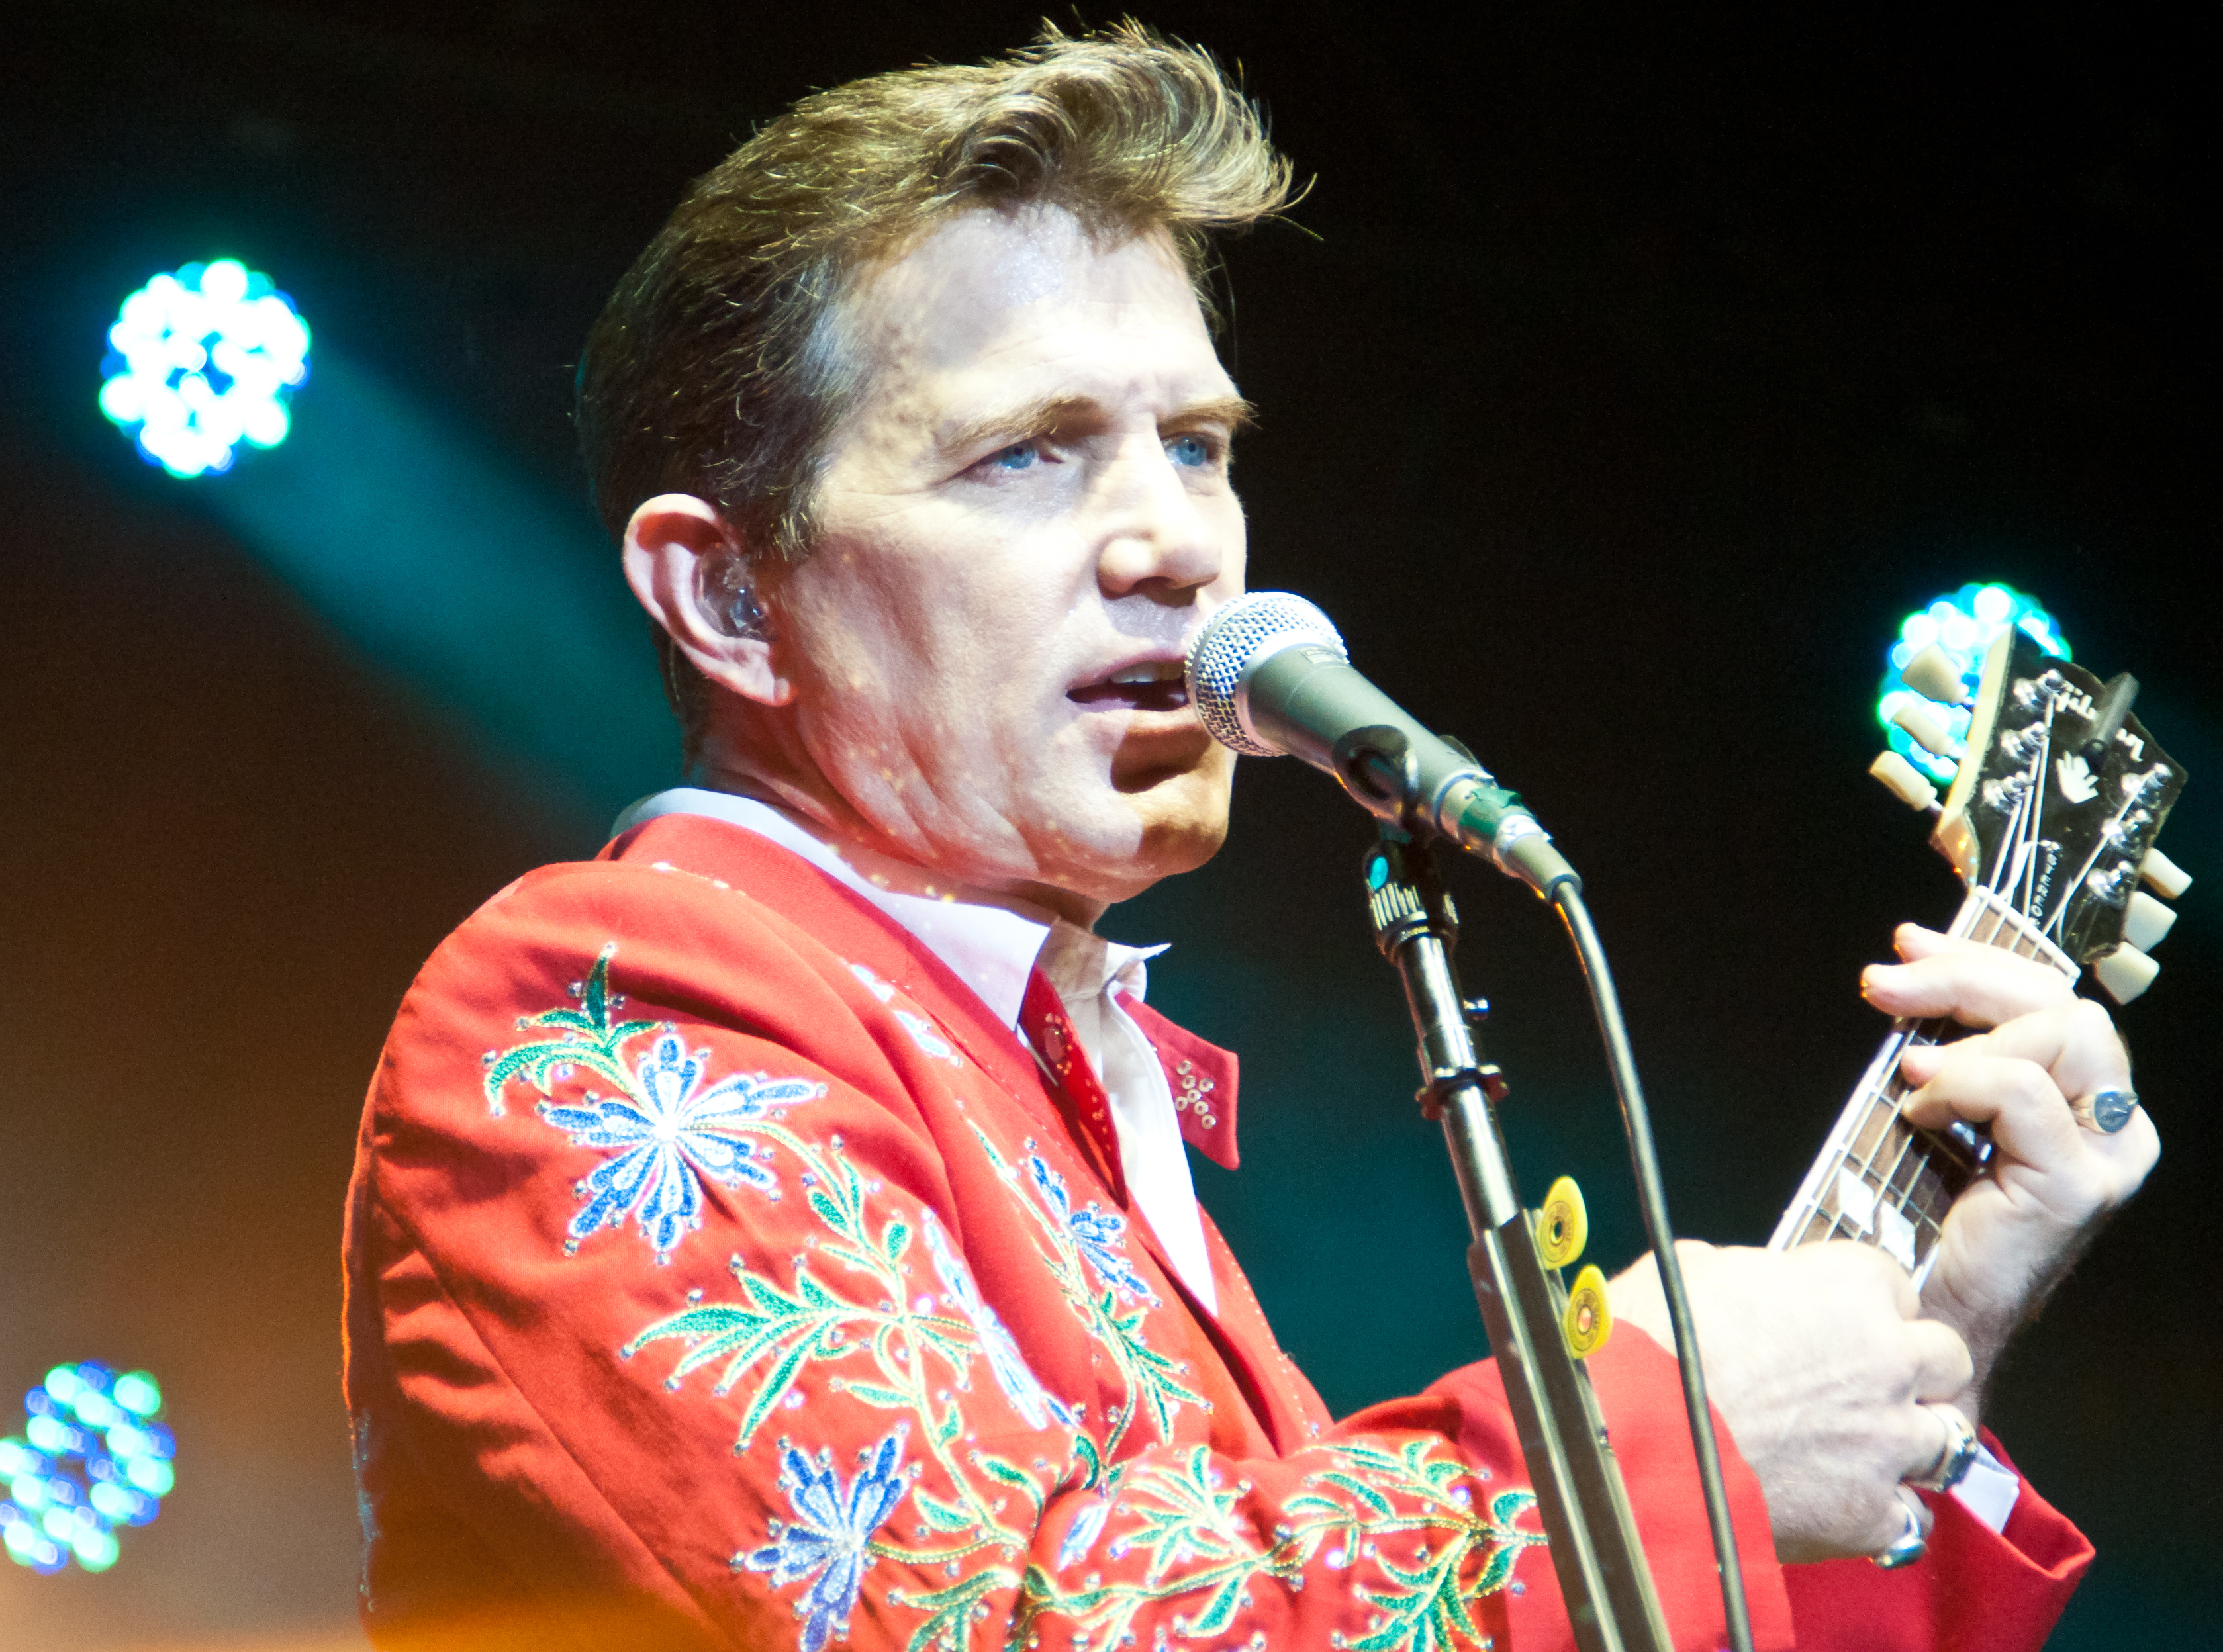 Chris Isaak Wallpapers Images Photos Pictures Backgrounds3358 x 2496